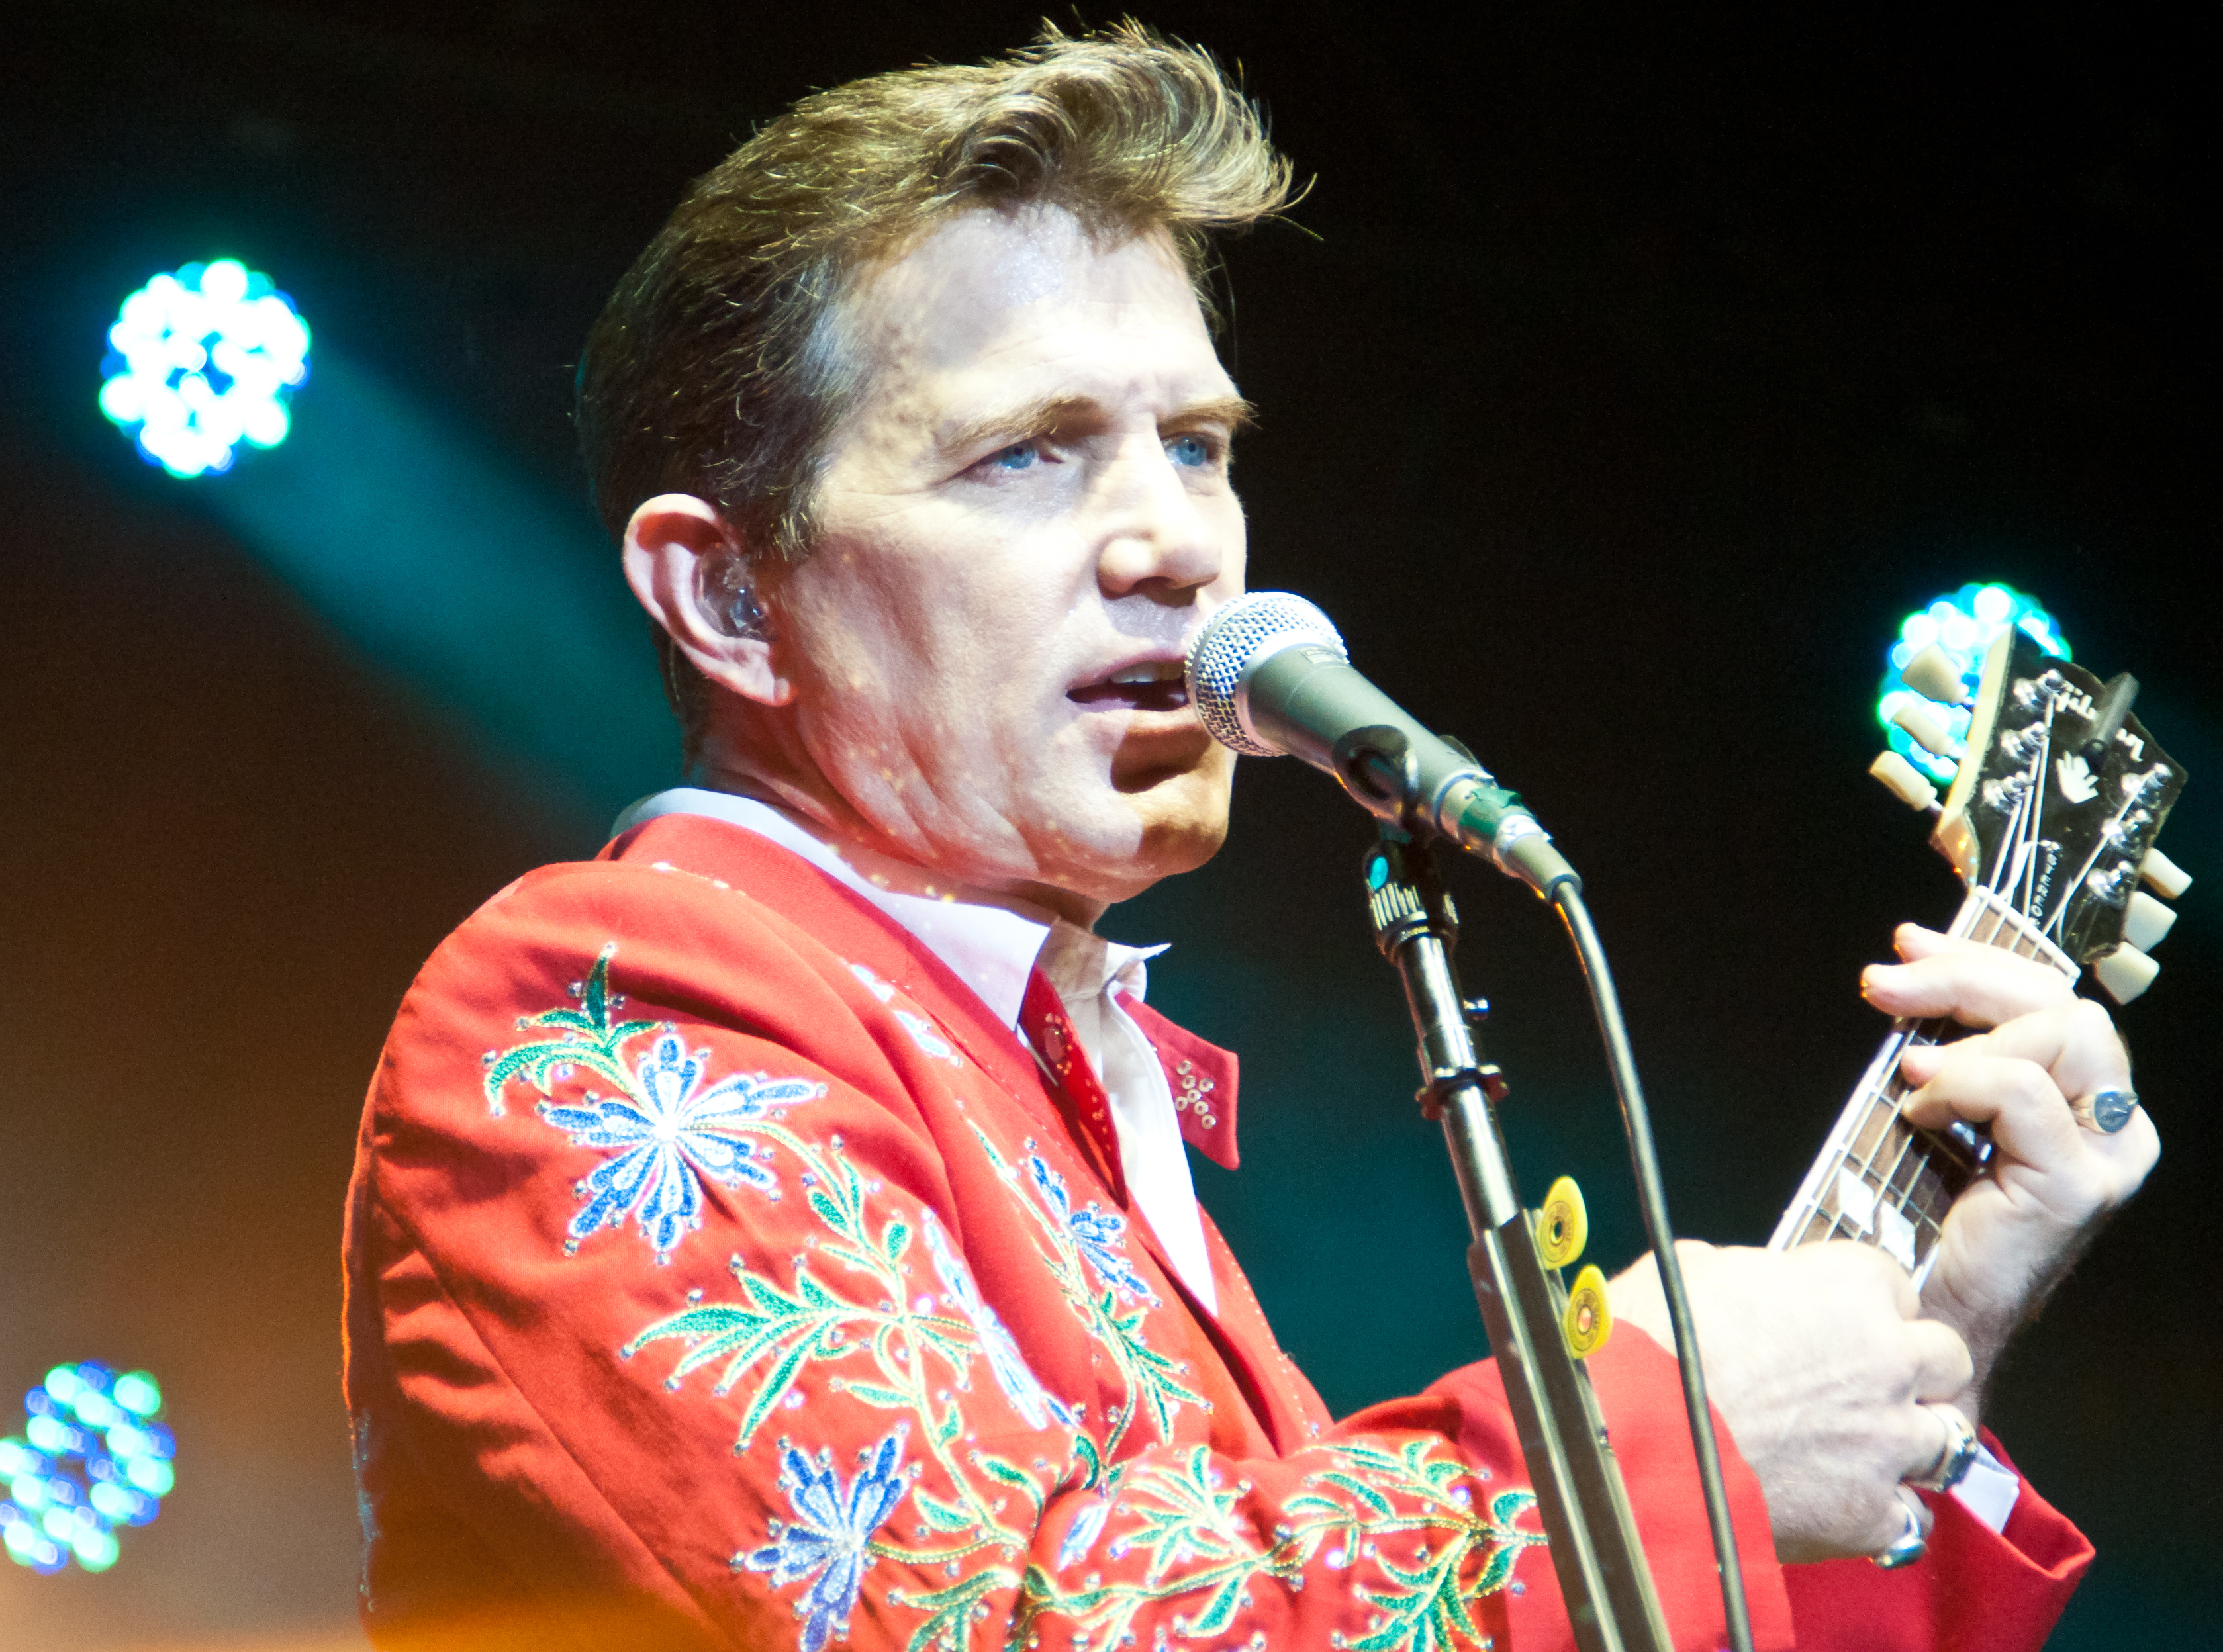 Chris Isaak Wallpapers Images Photos Pictures Backgrounds3358 x 2496